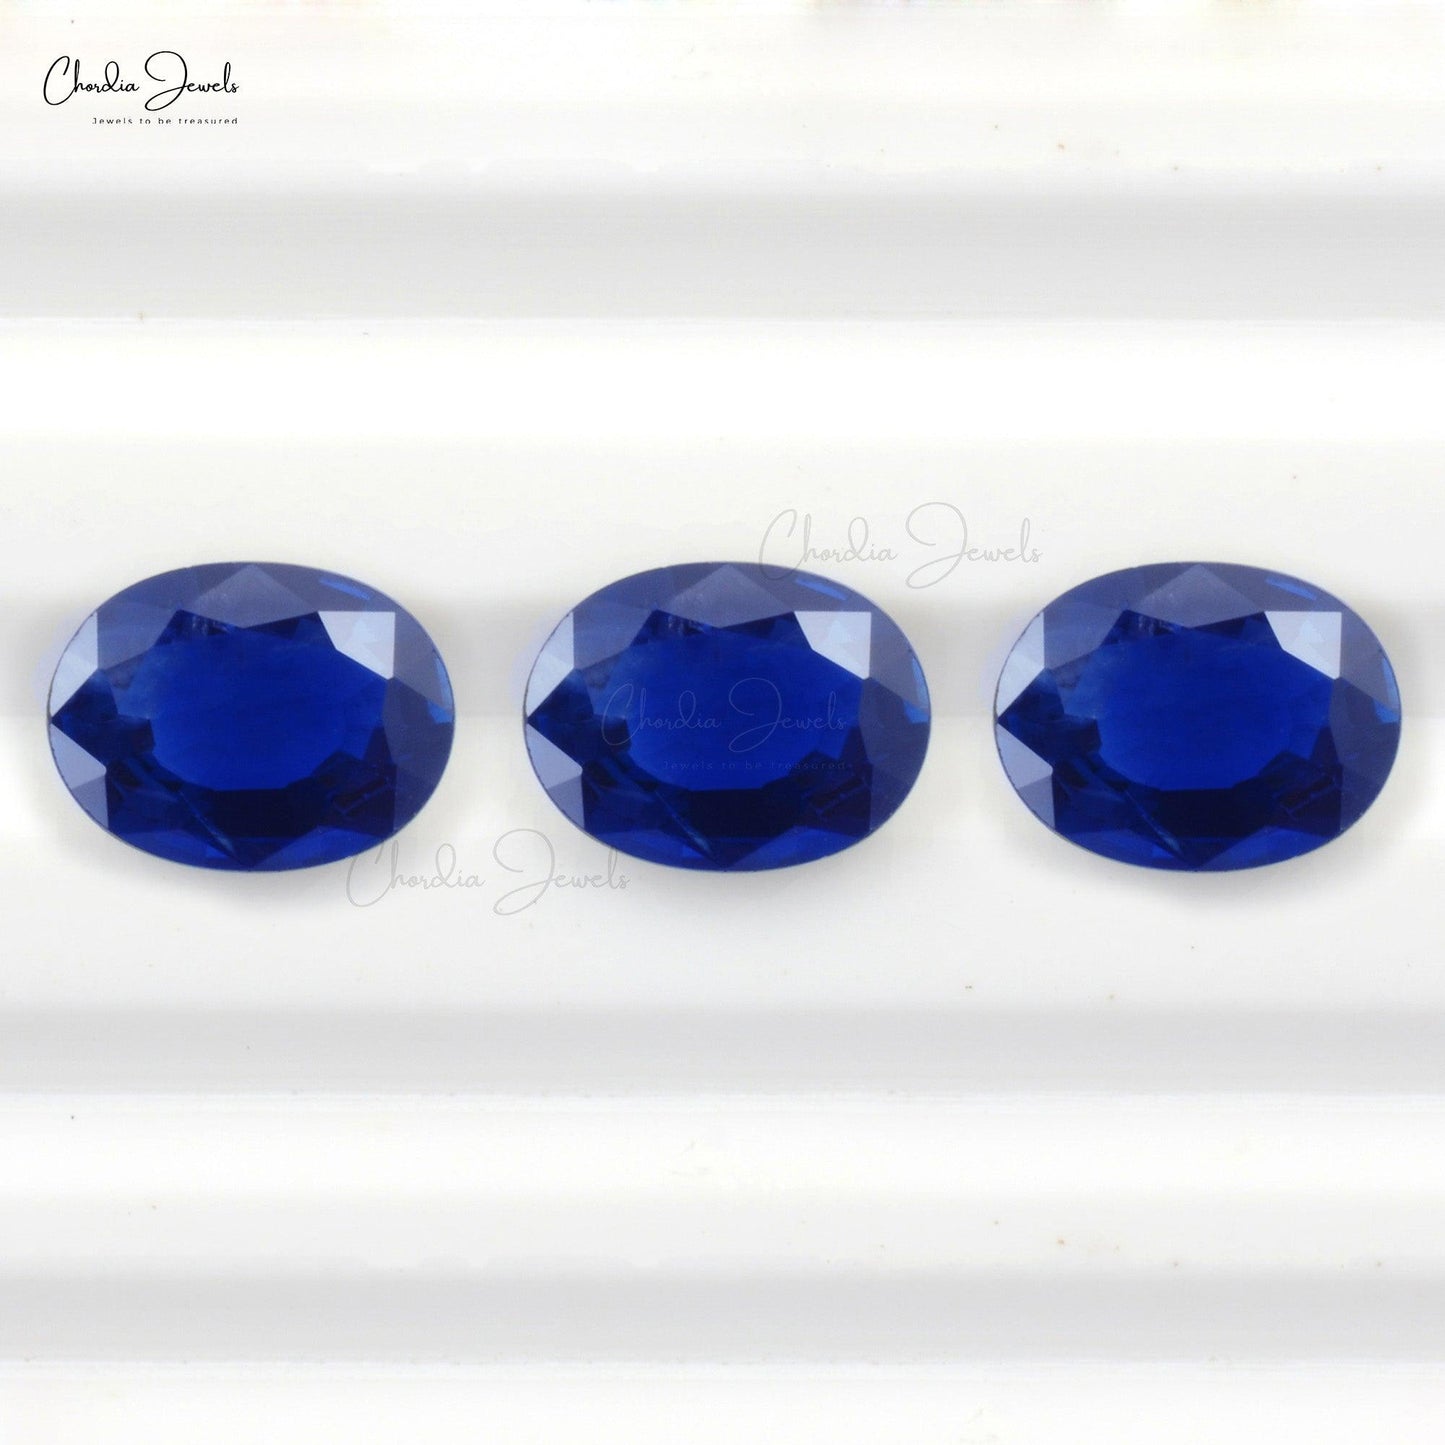 1 Carat Royal Blue Sapphire Oval For Engagement Ring, 1 Piece - Chordia Jewels